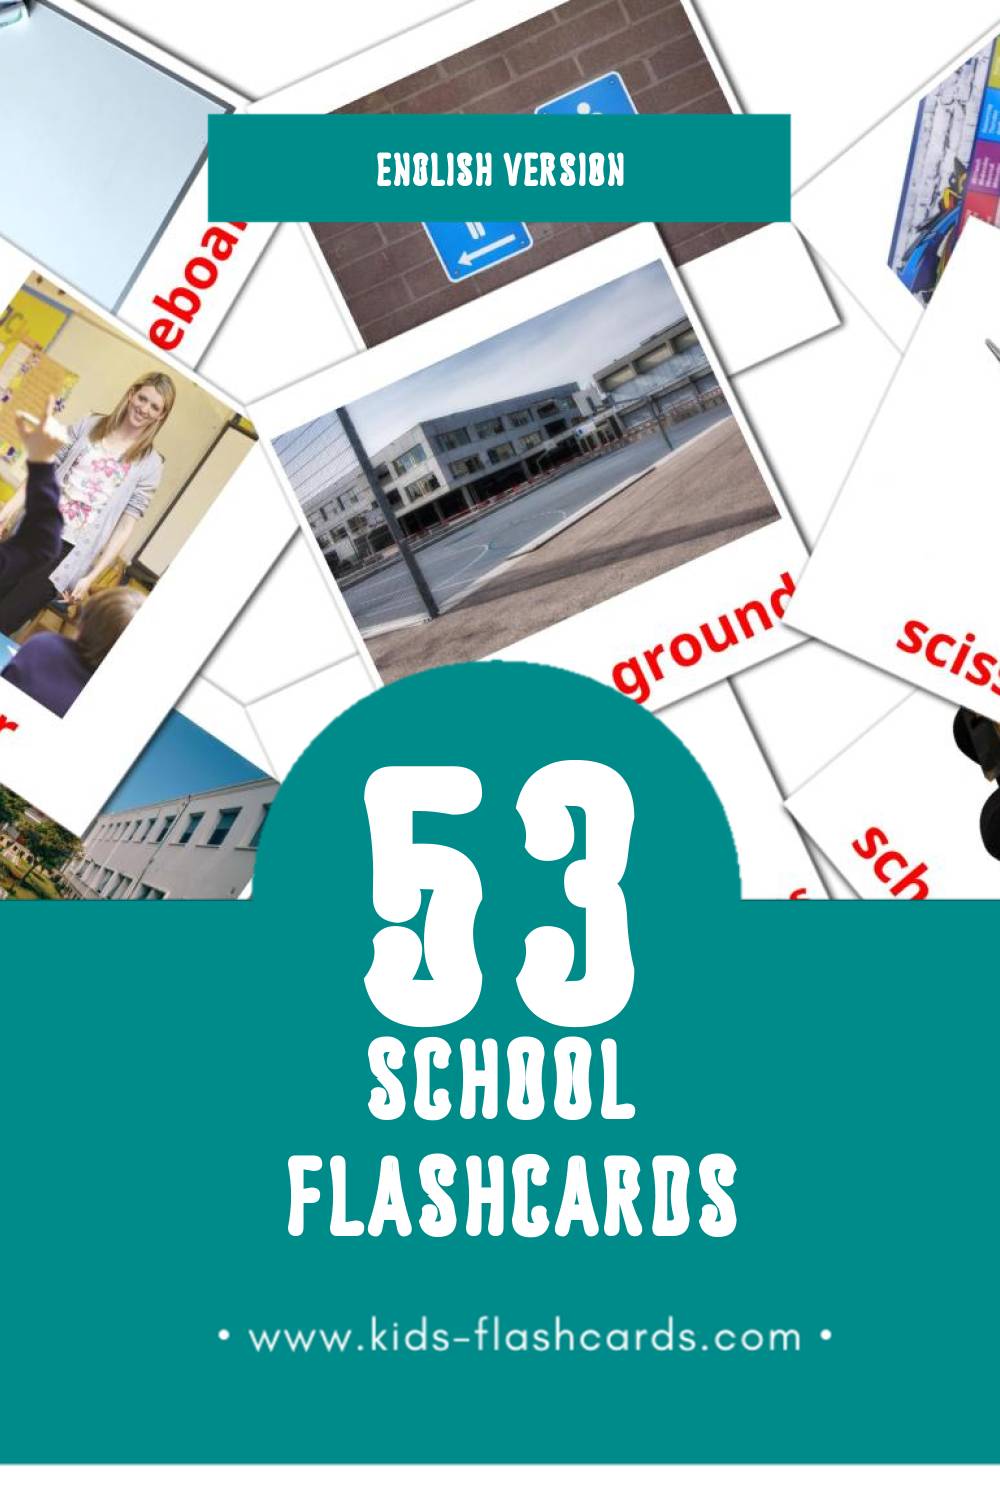 Visual School Flashcards for Toddlers (53 cards in English)